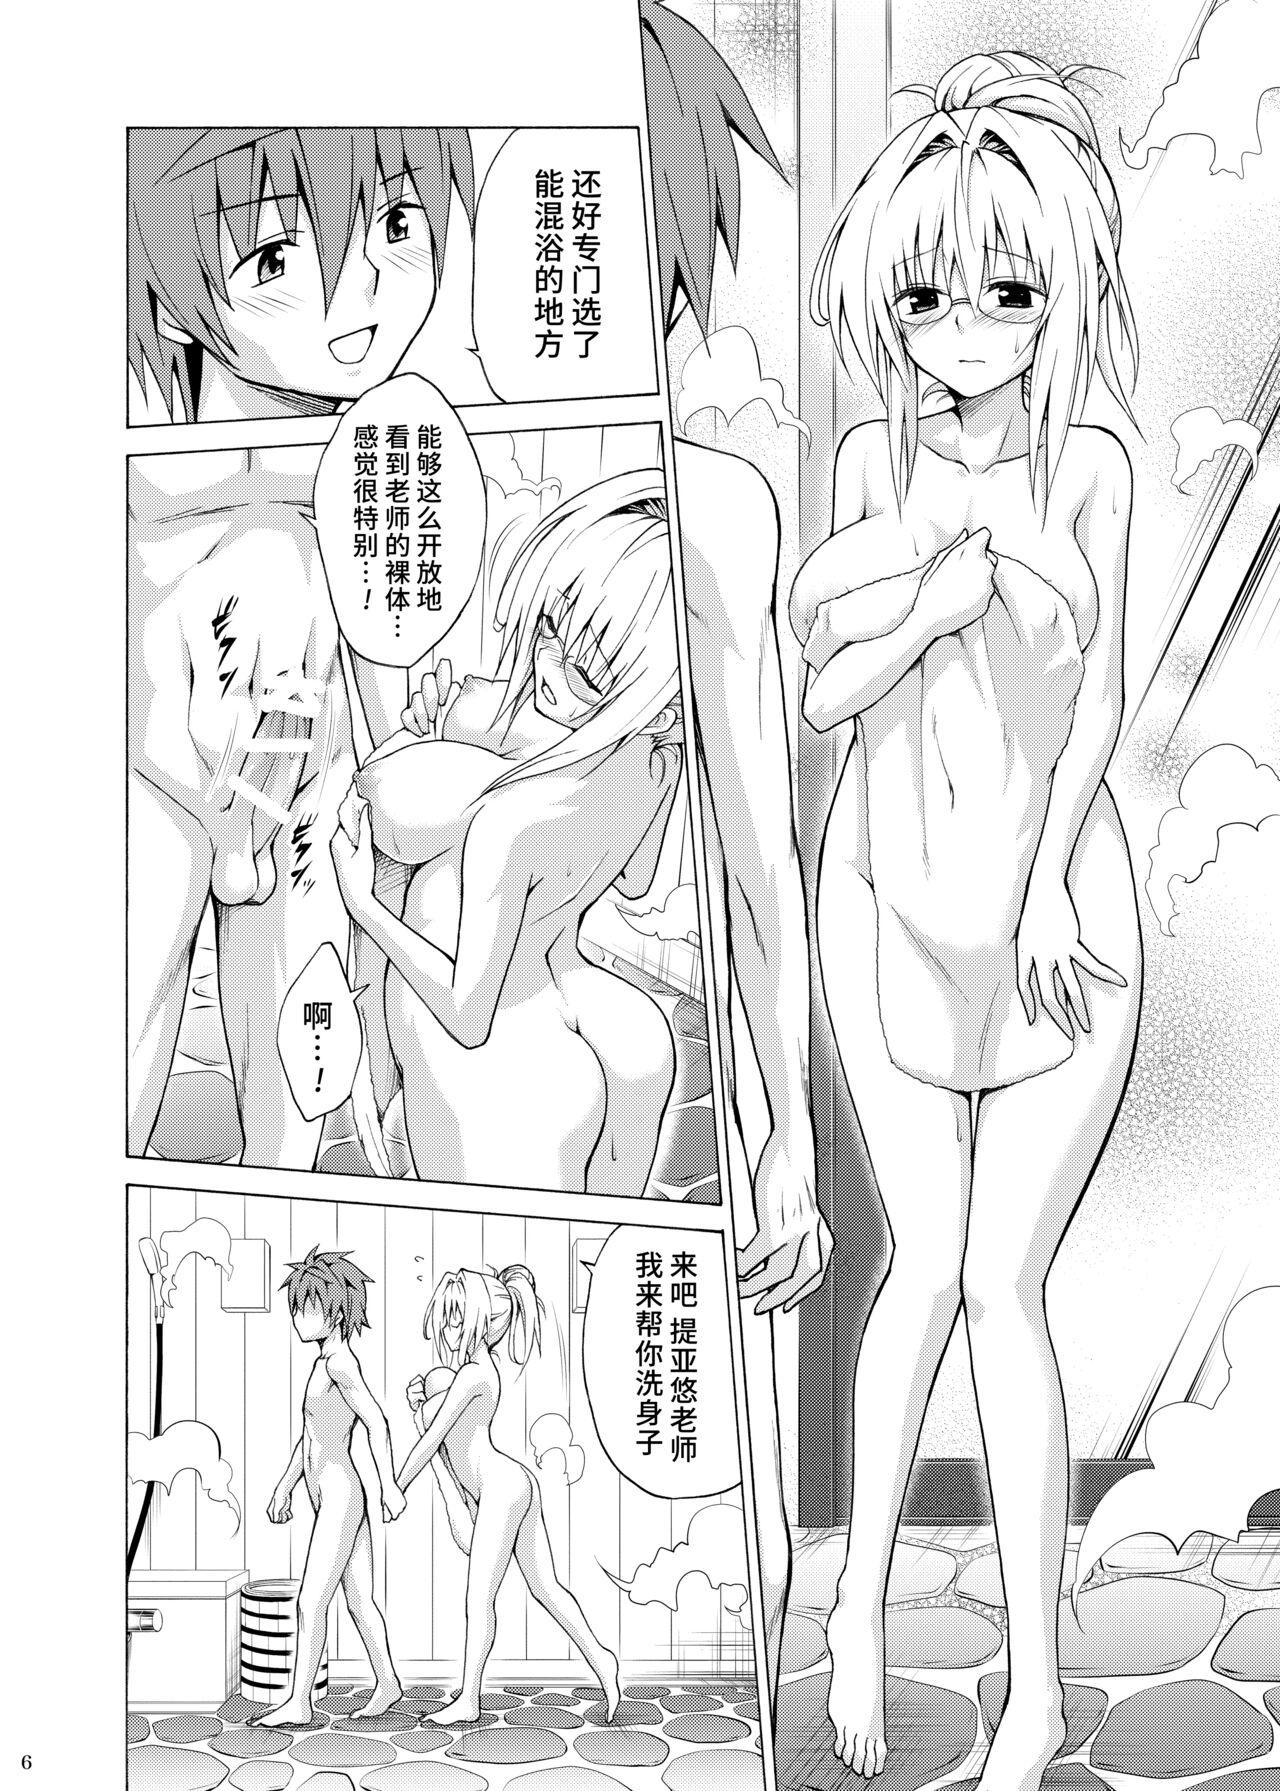 Camgirls Trouble Teachers Vol. 5 - To love ru Cougar - Page 5